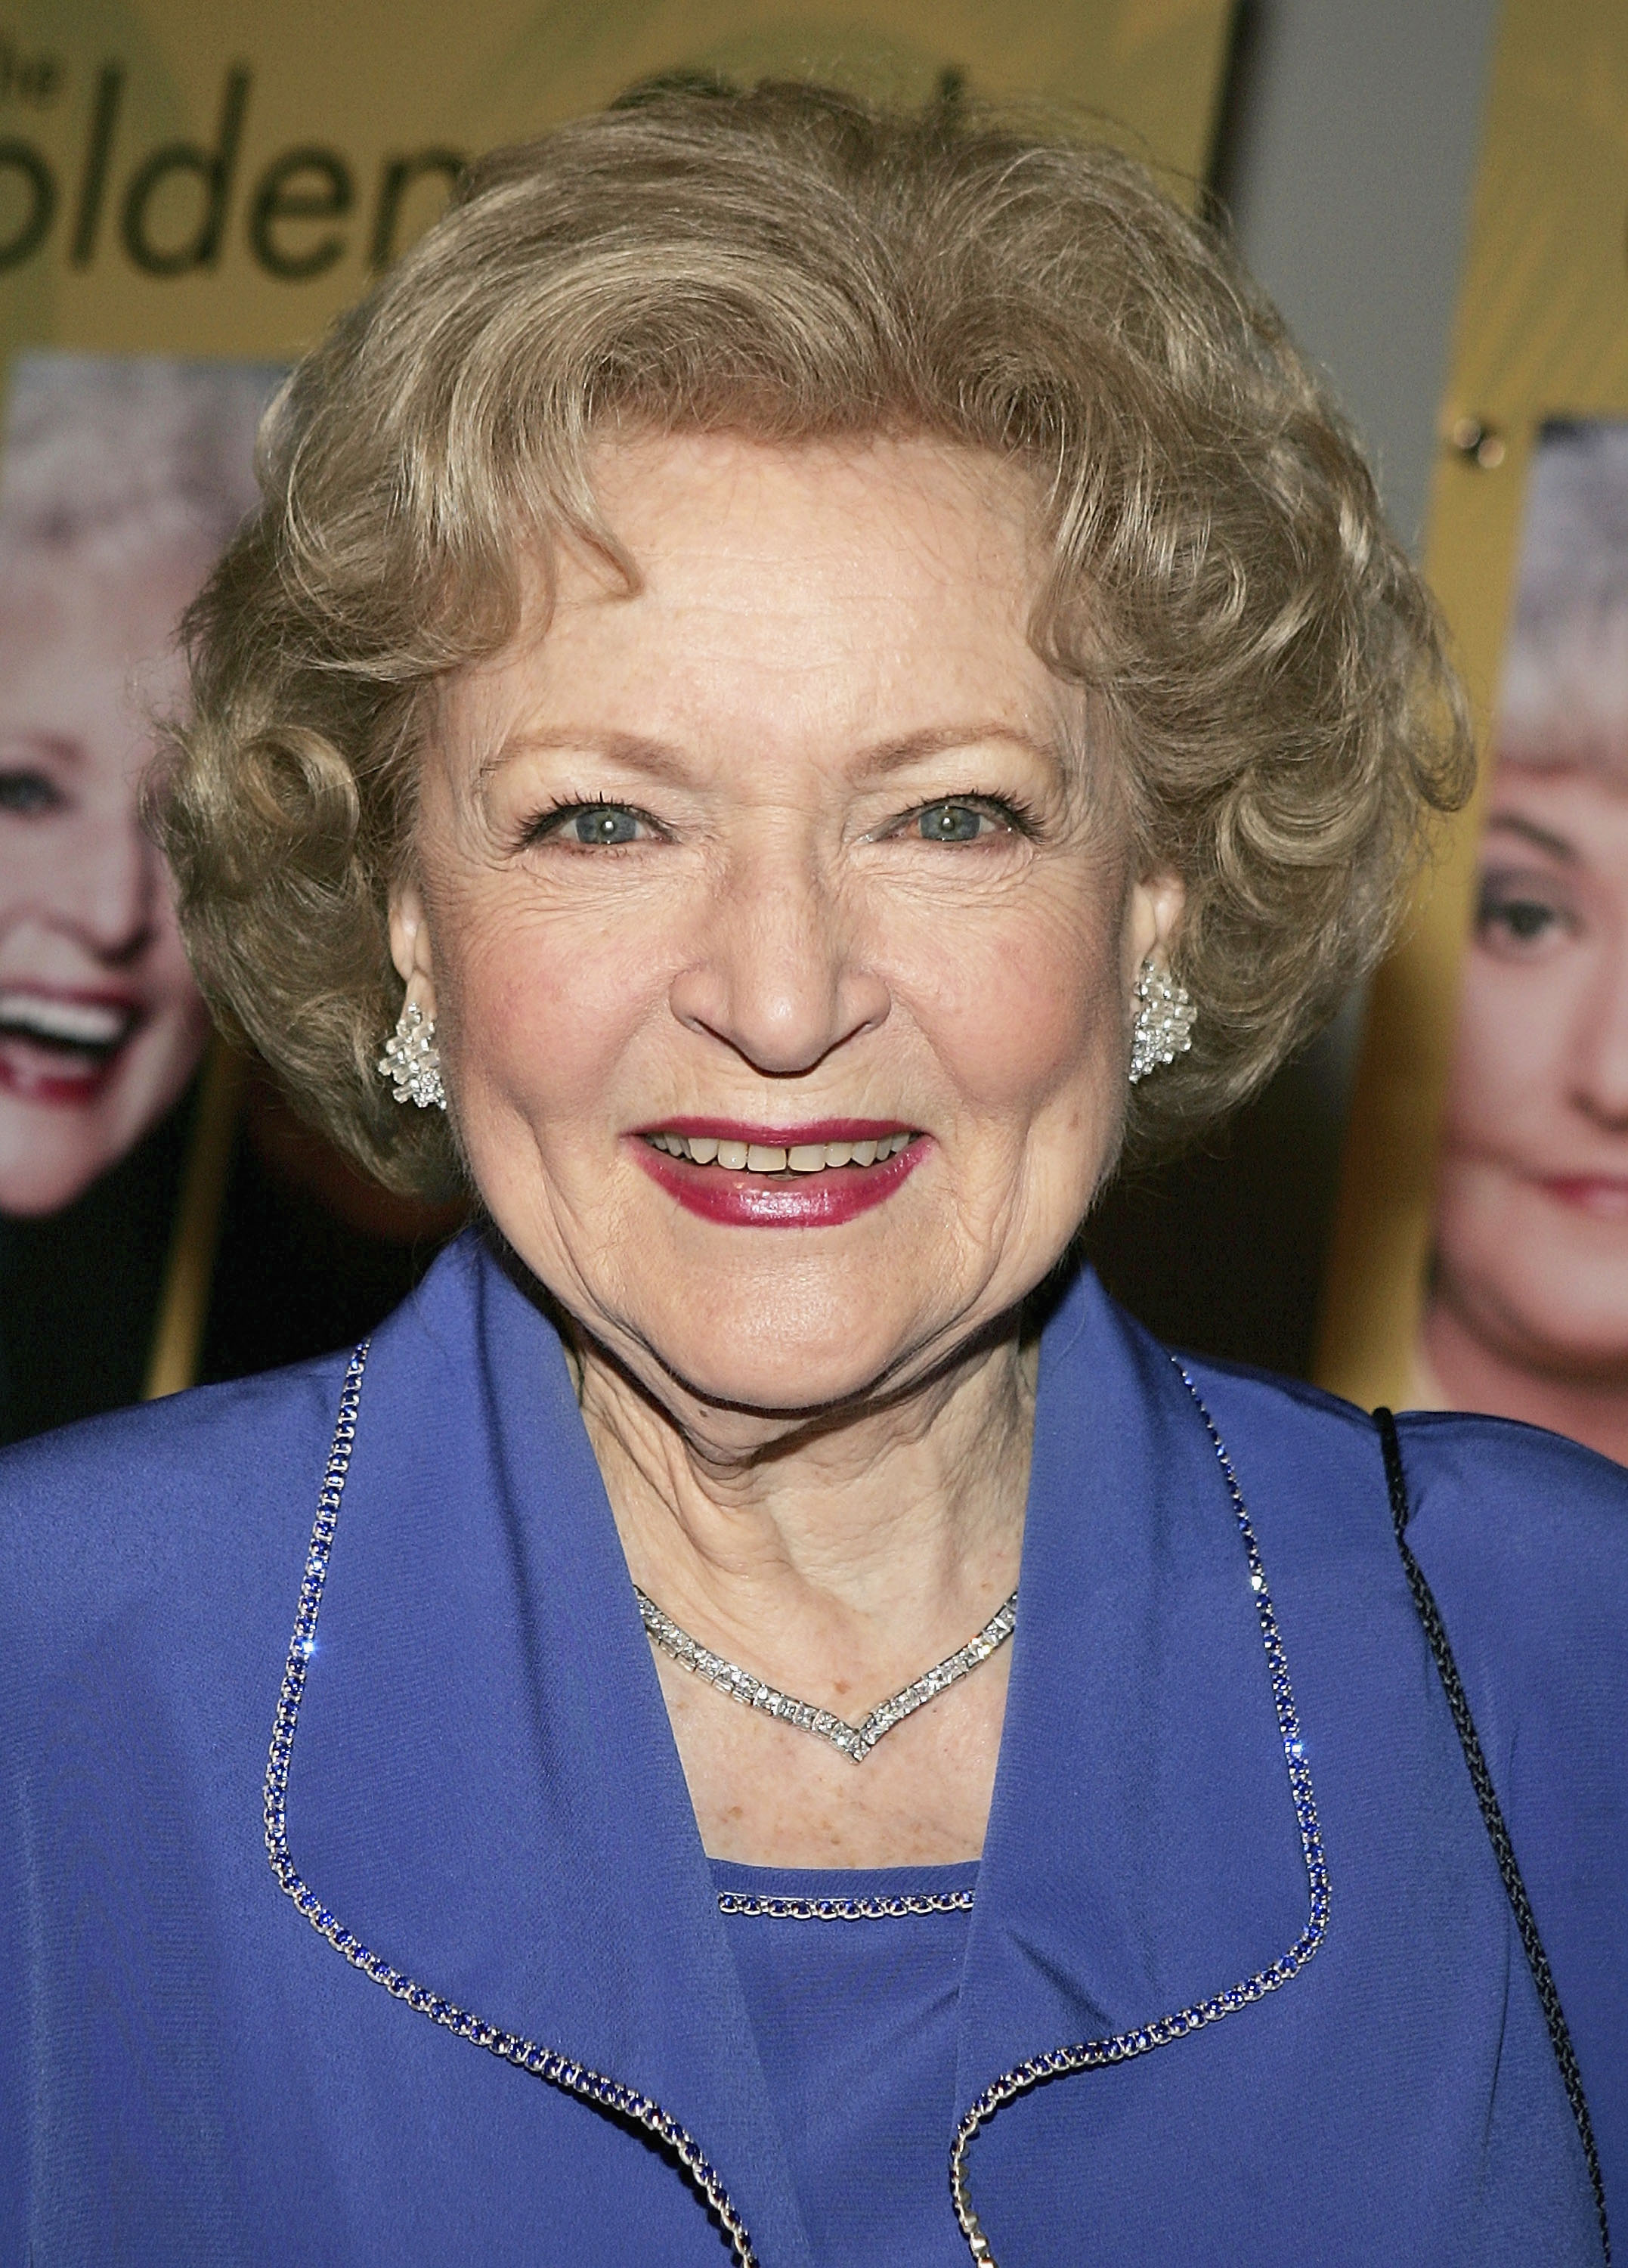 Betty White at the DVD release party for the first season of "The Golden Girls" on November 18, 2004, in California. | Source: Getty Images